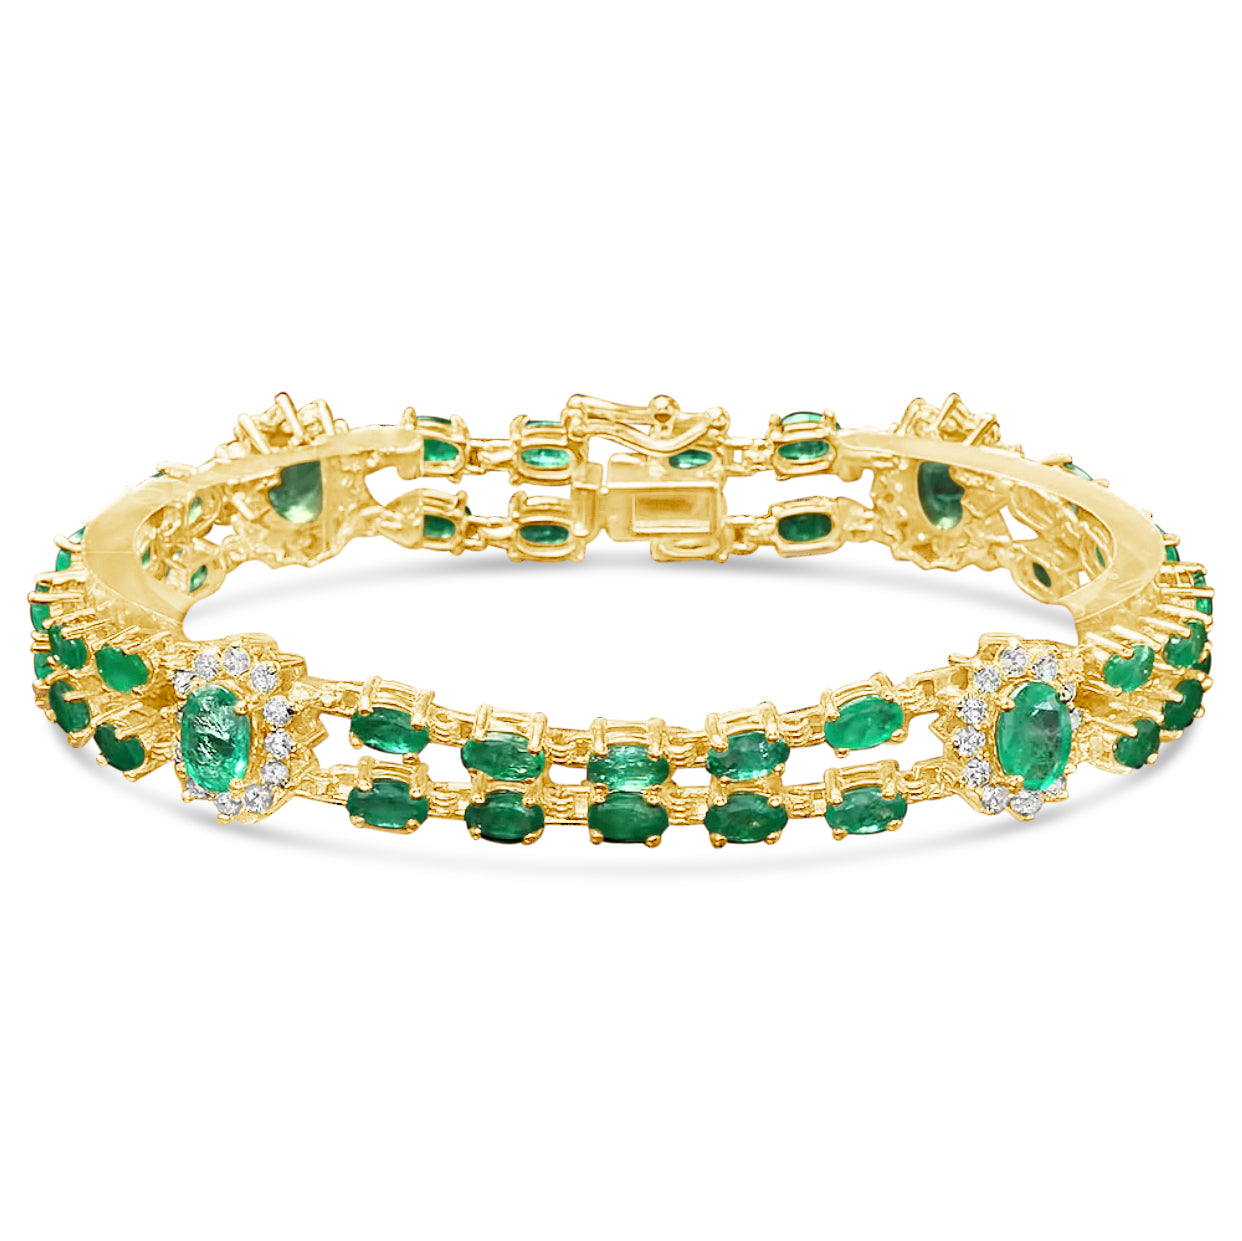 8.64 carats 42 Colombian Emeralds and 1.11 cts Diamonds Brace let 14K Yellow Gold  Special Edition